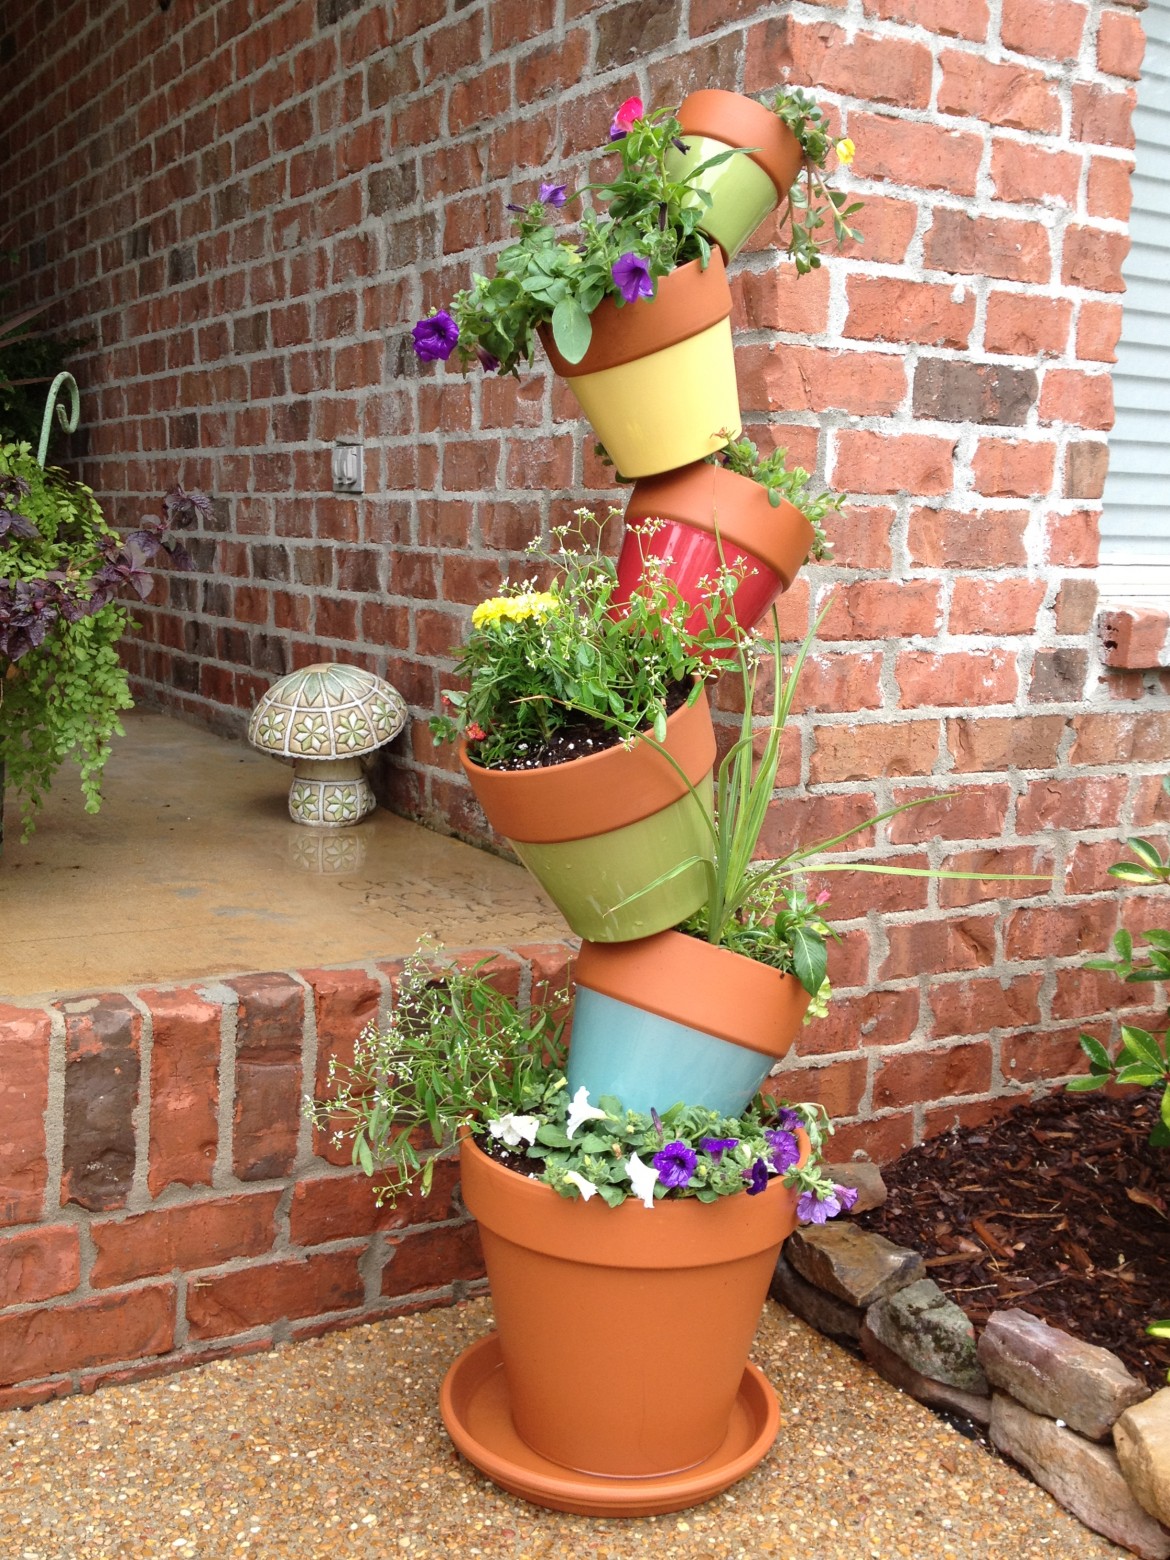 Cleverly stacked pots can make an amazing dramatic effect -- and make people stop in wonder.